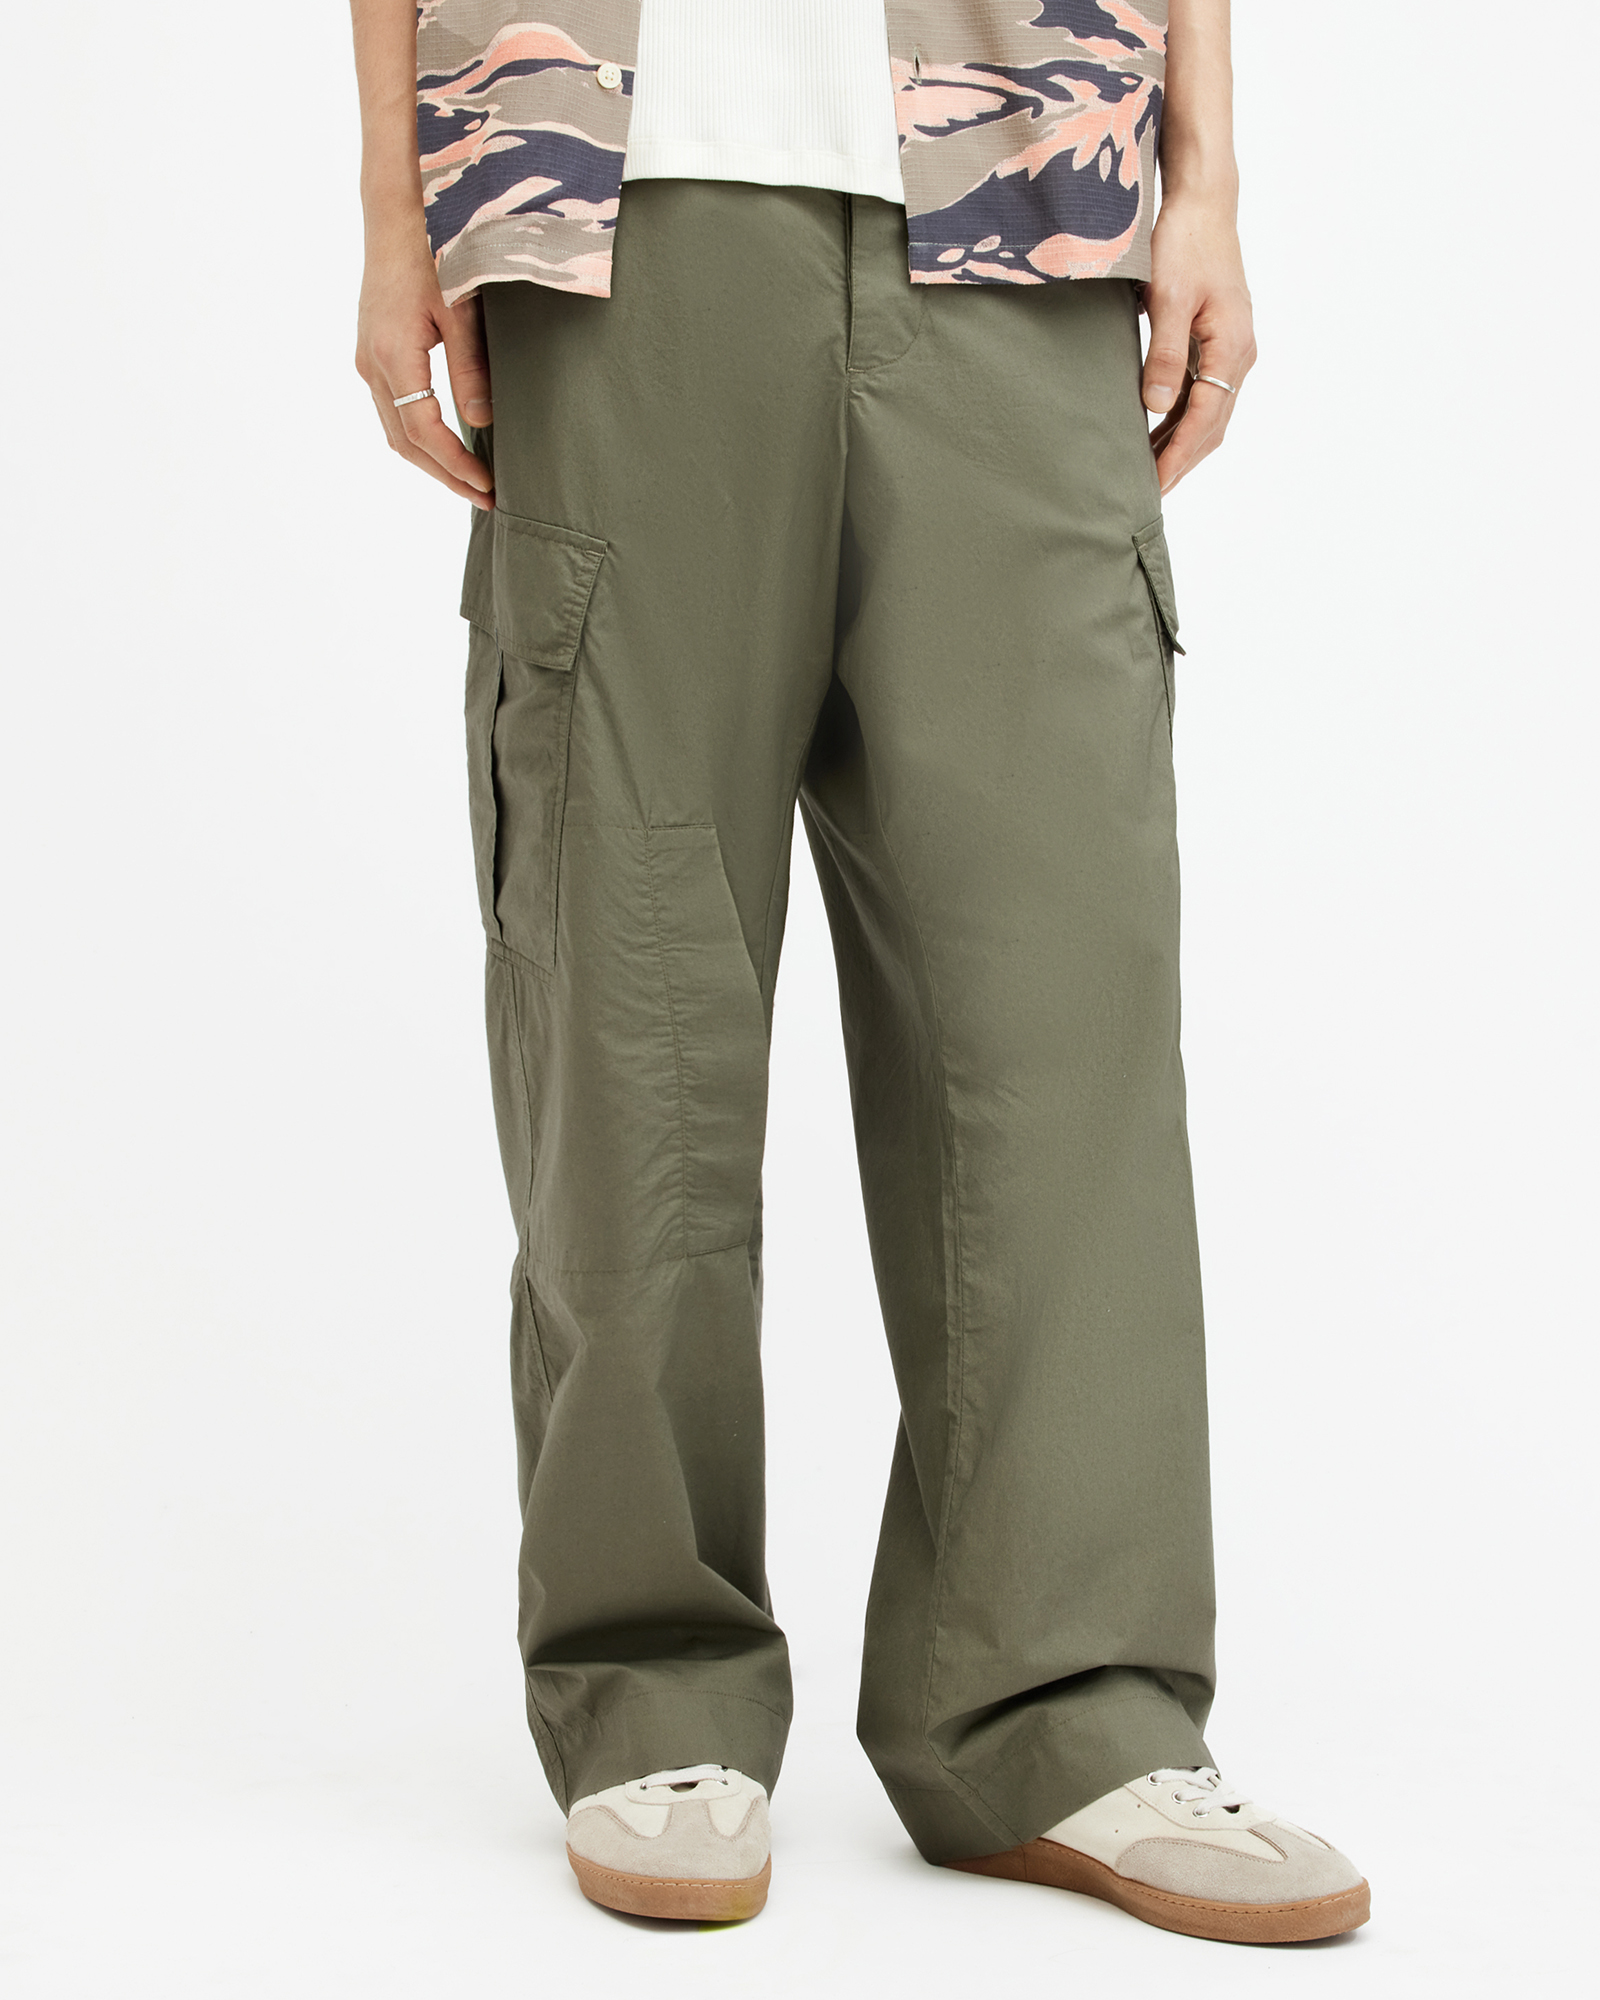 AllSaints Verge Wide Leg Relaxed Fit Cargo Trousers,, VALLEY GREEN